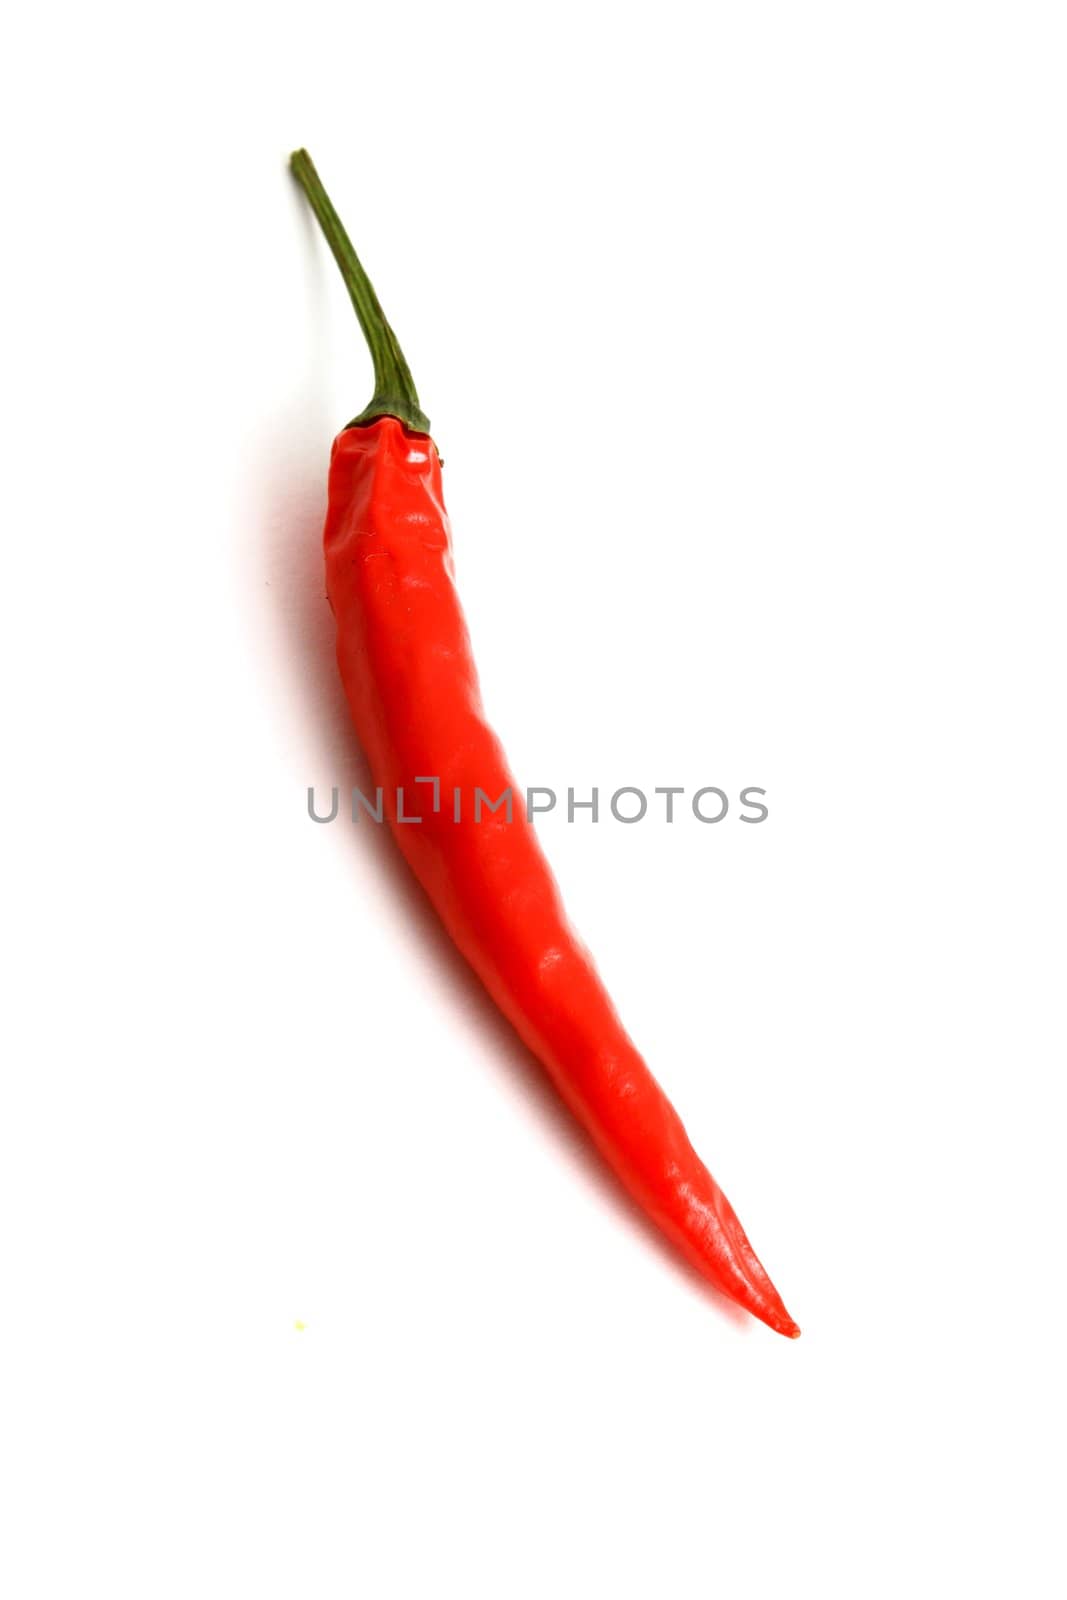 red hot chili pepper by Yellowj